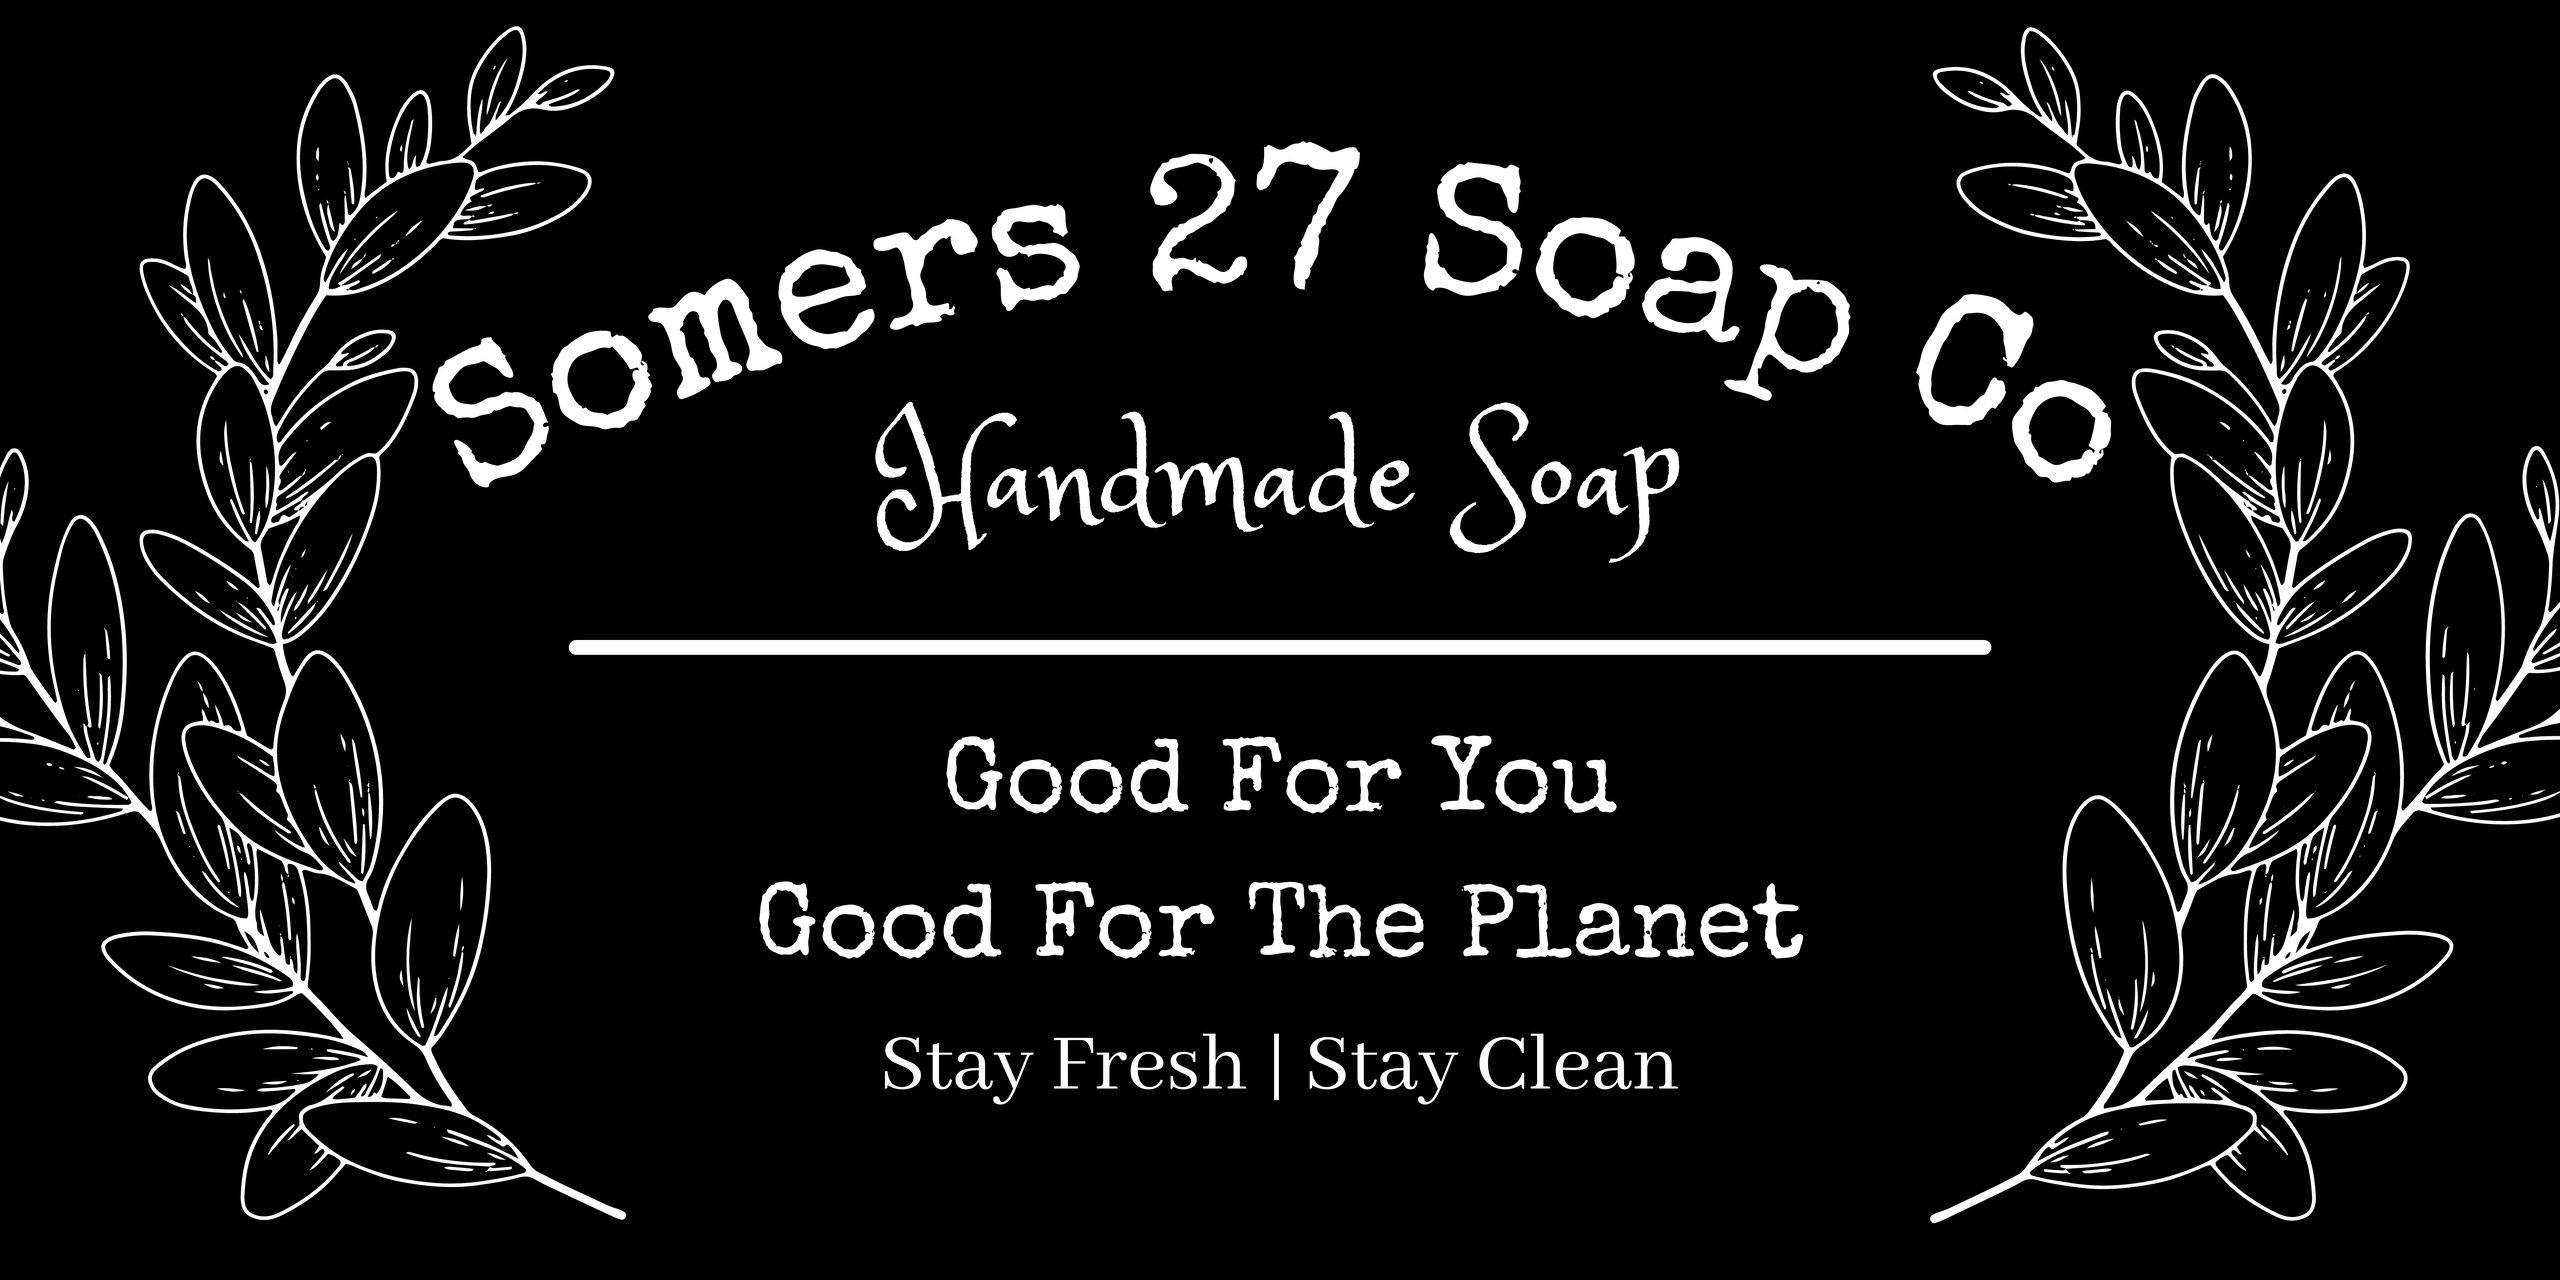 Somers 27 Soap Co